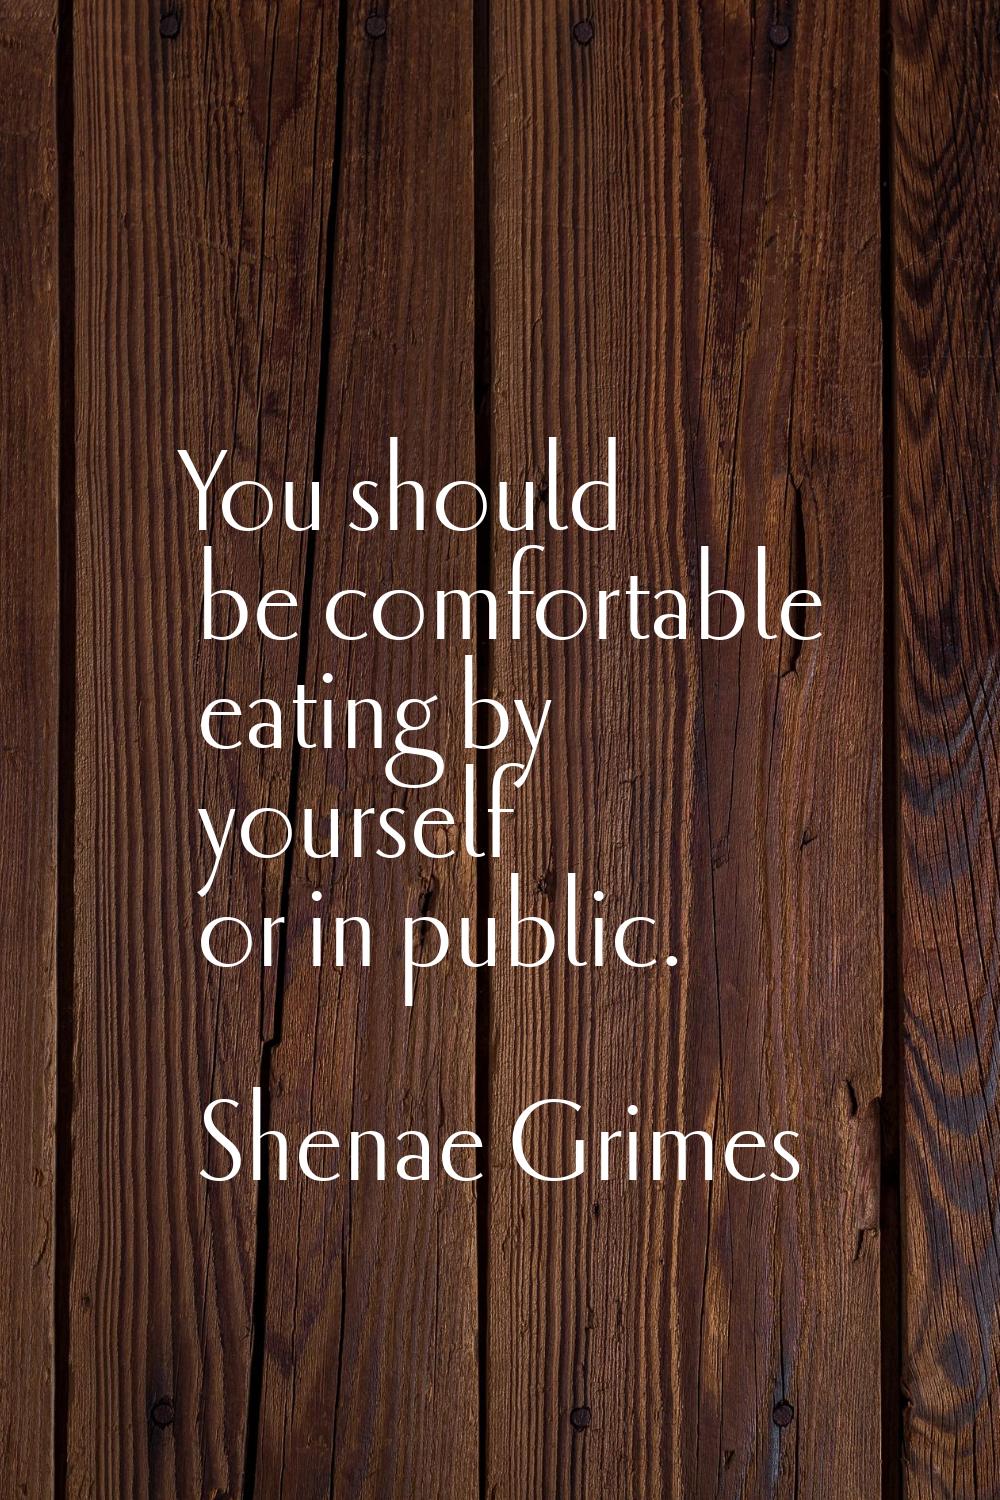 You should be comfortable eating by yourself or in public.